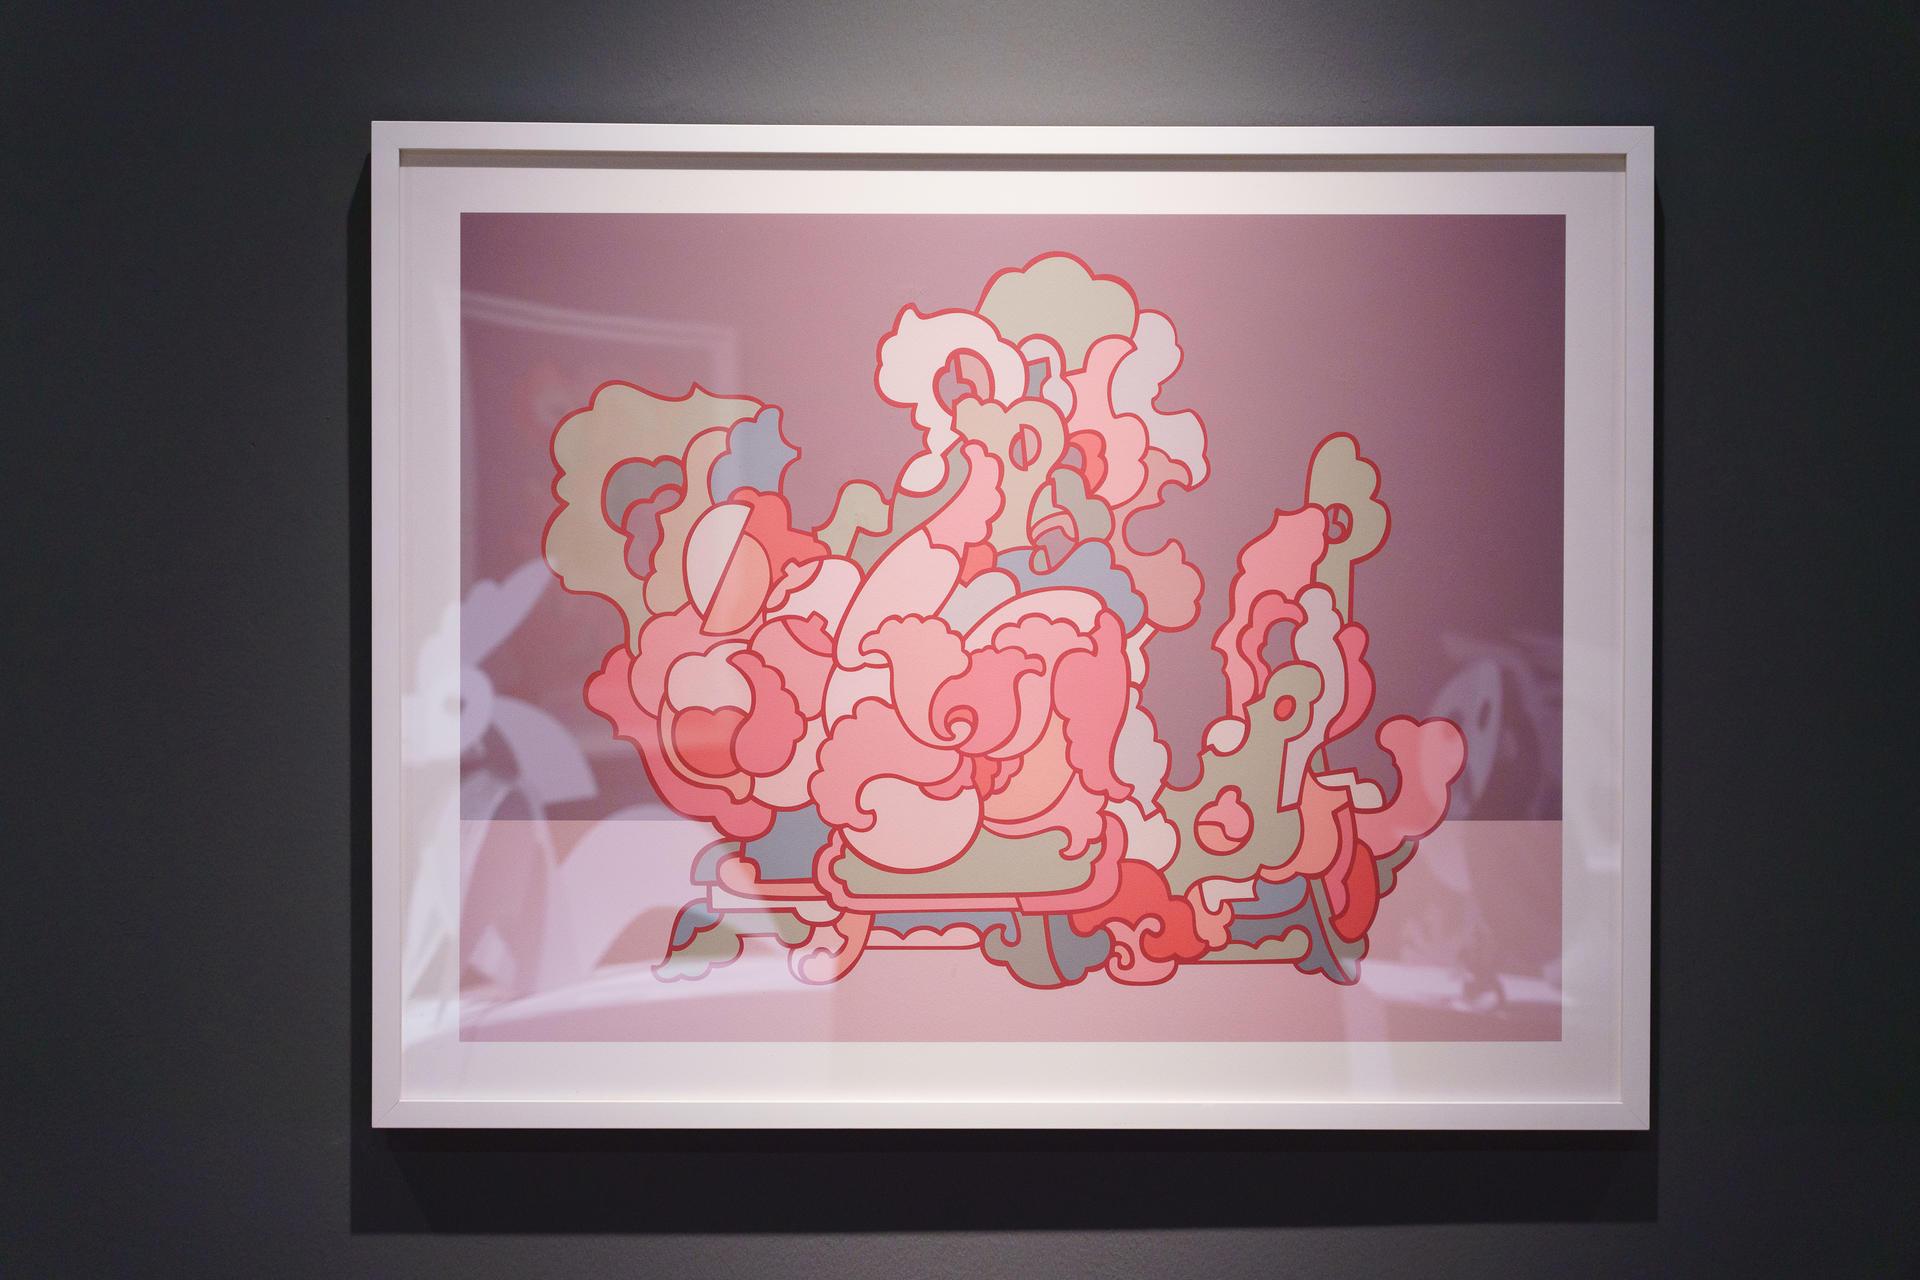 Pop Style- Limited Edition Abstract Prints - Spring Rosy Clouds #14
The piece is signed and numbered, limited edition of 99 A.P

About Spring Rosy Clouds 
The highly conceptual series has drawn materials from the rocks of Chinese Gardens. Garden